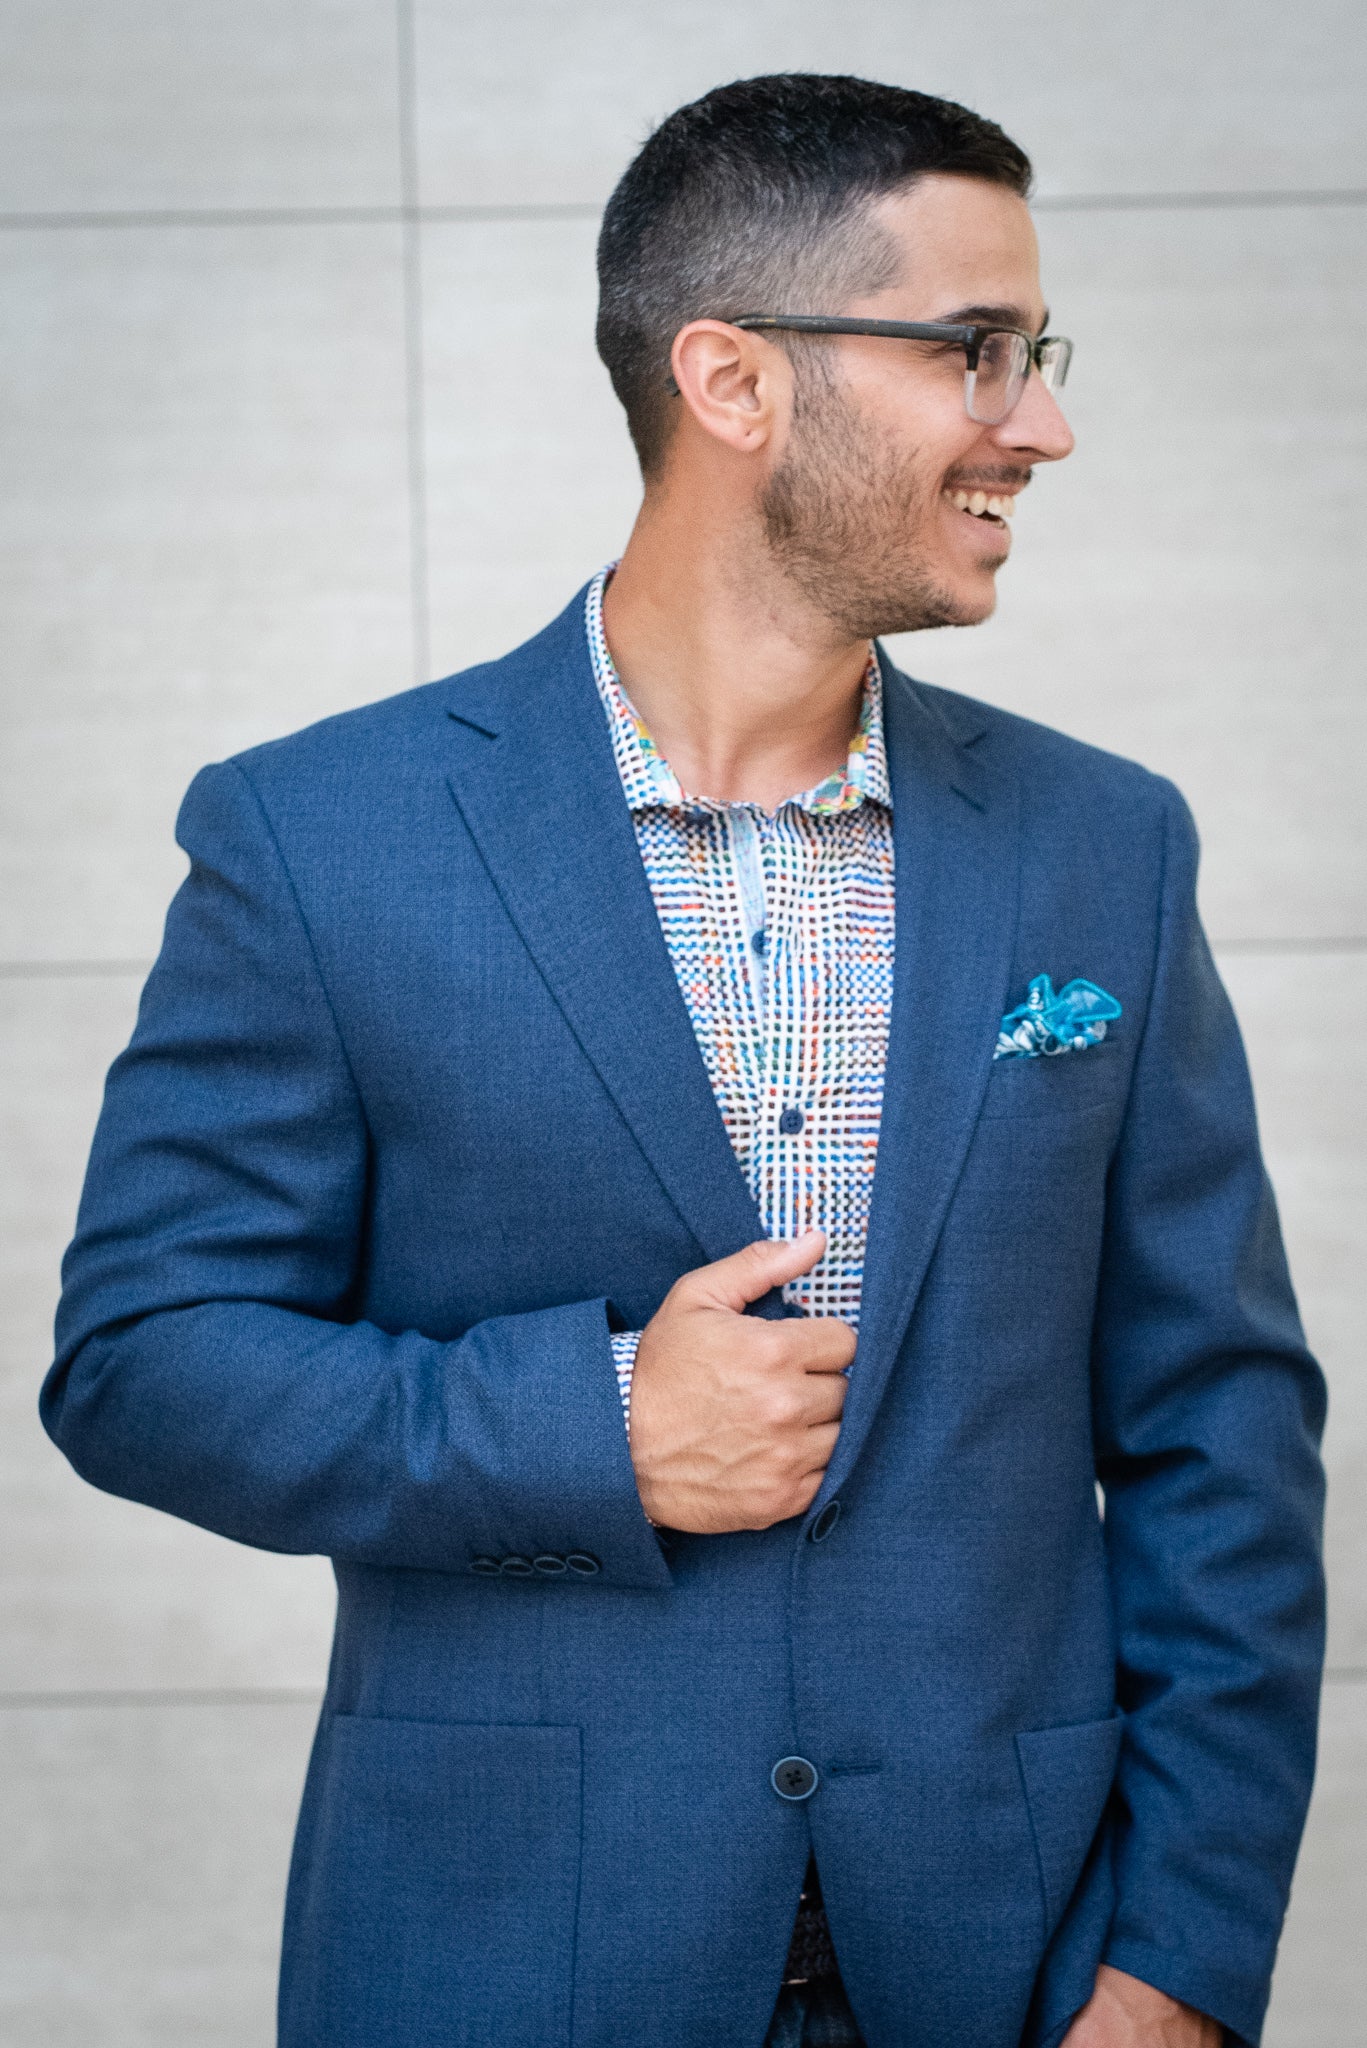 Lightweight Sport Coat: What To Wear To Look Cool, Even When The Tempe ...